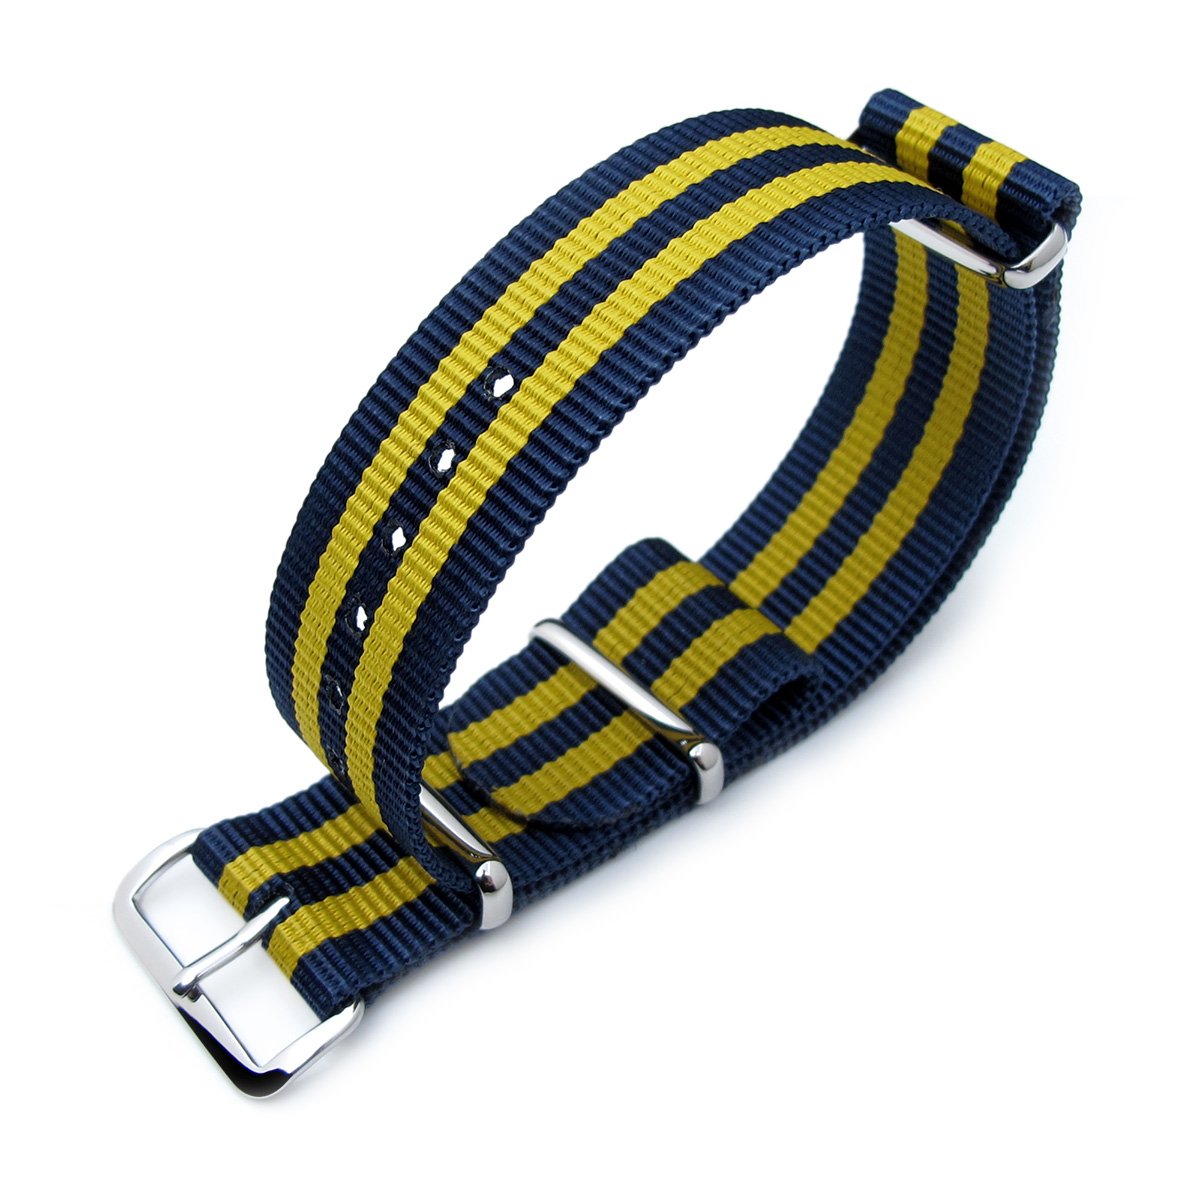 MiLTAT 18mm 20mm or 22mm G10 Military Watch Strap Ballistic Nylon Armband Polished Double Yellow and Blue Strapcode Watch Bands